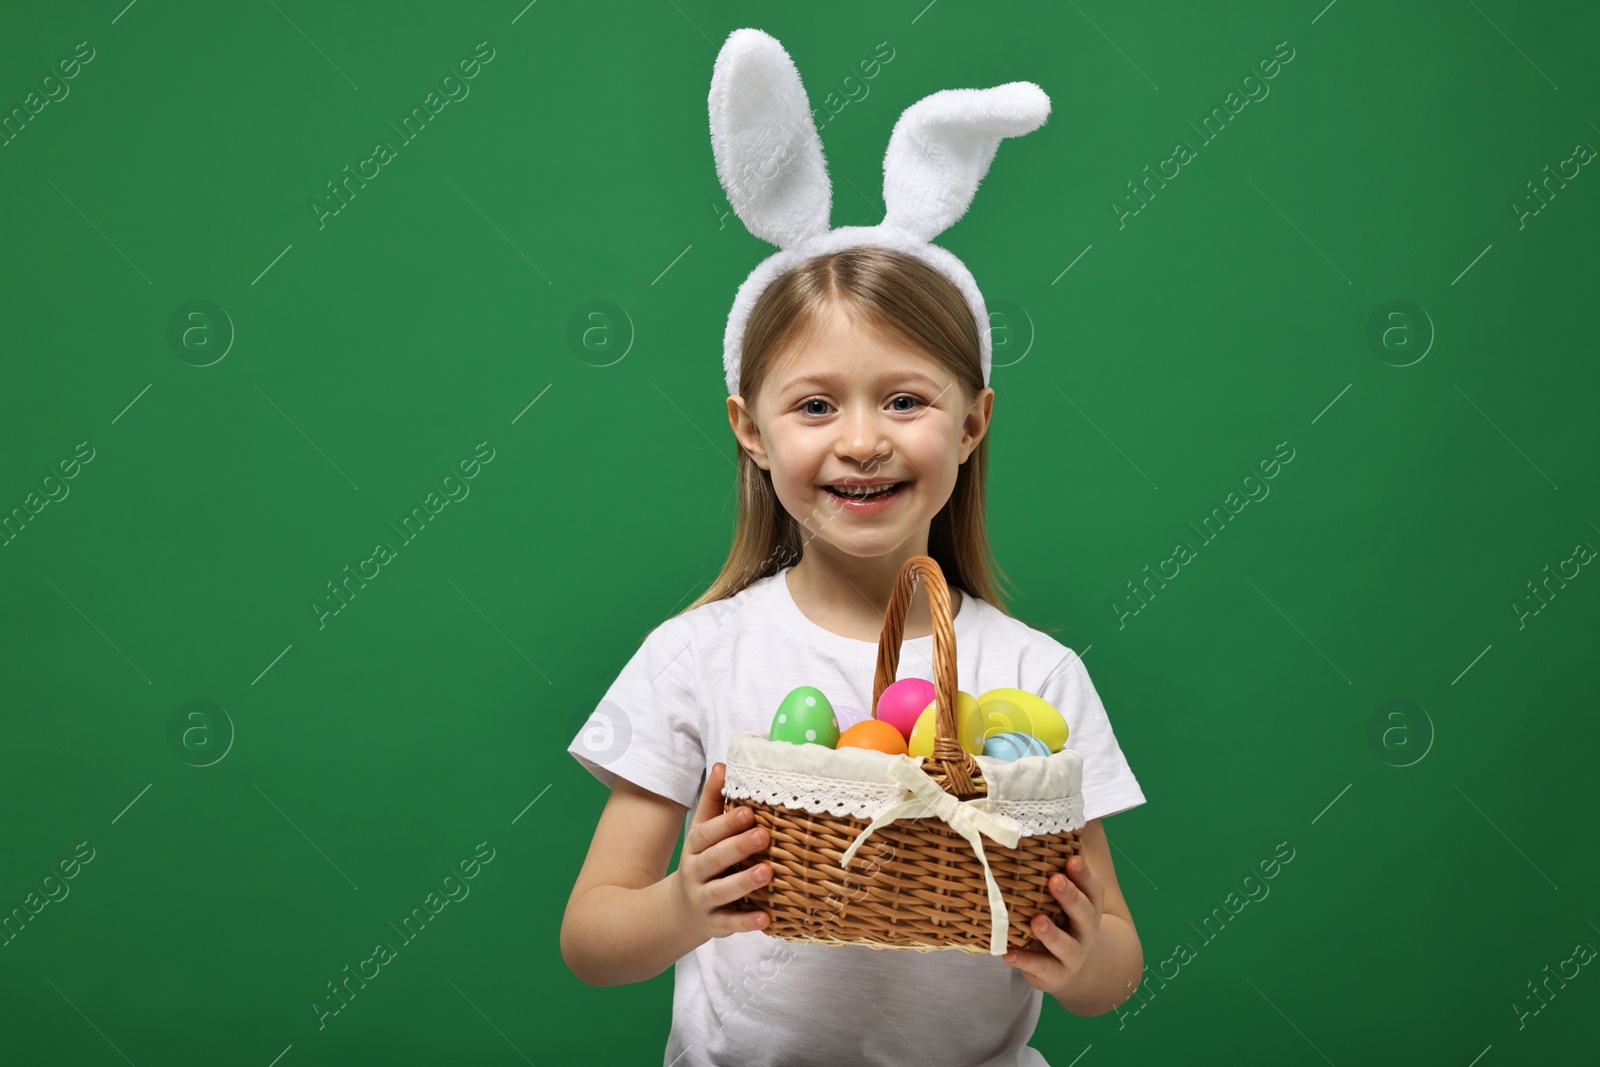 Photo of Easter celebration. Cute girl with bunny ears holding basket of painted eggs on green background